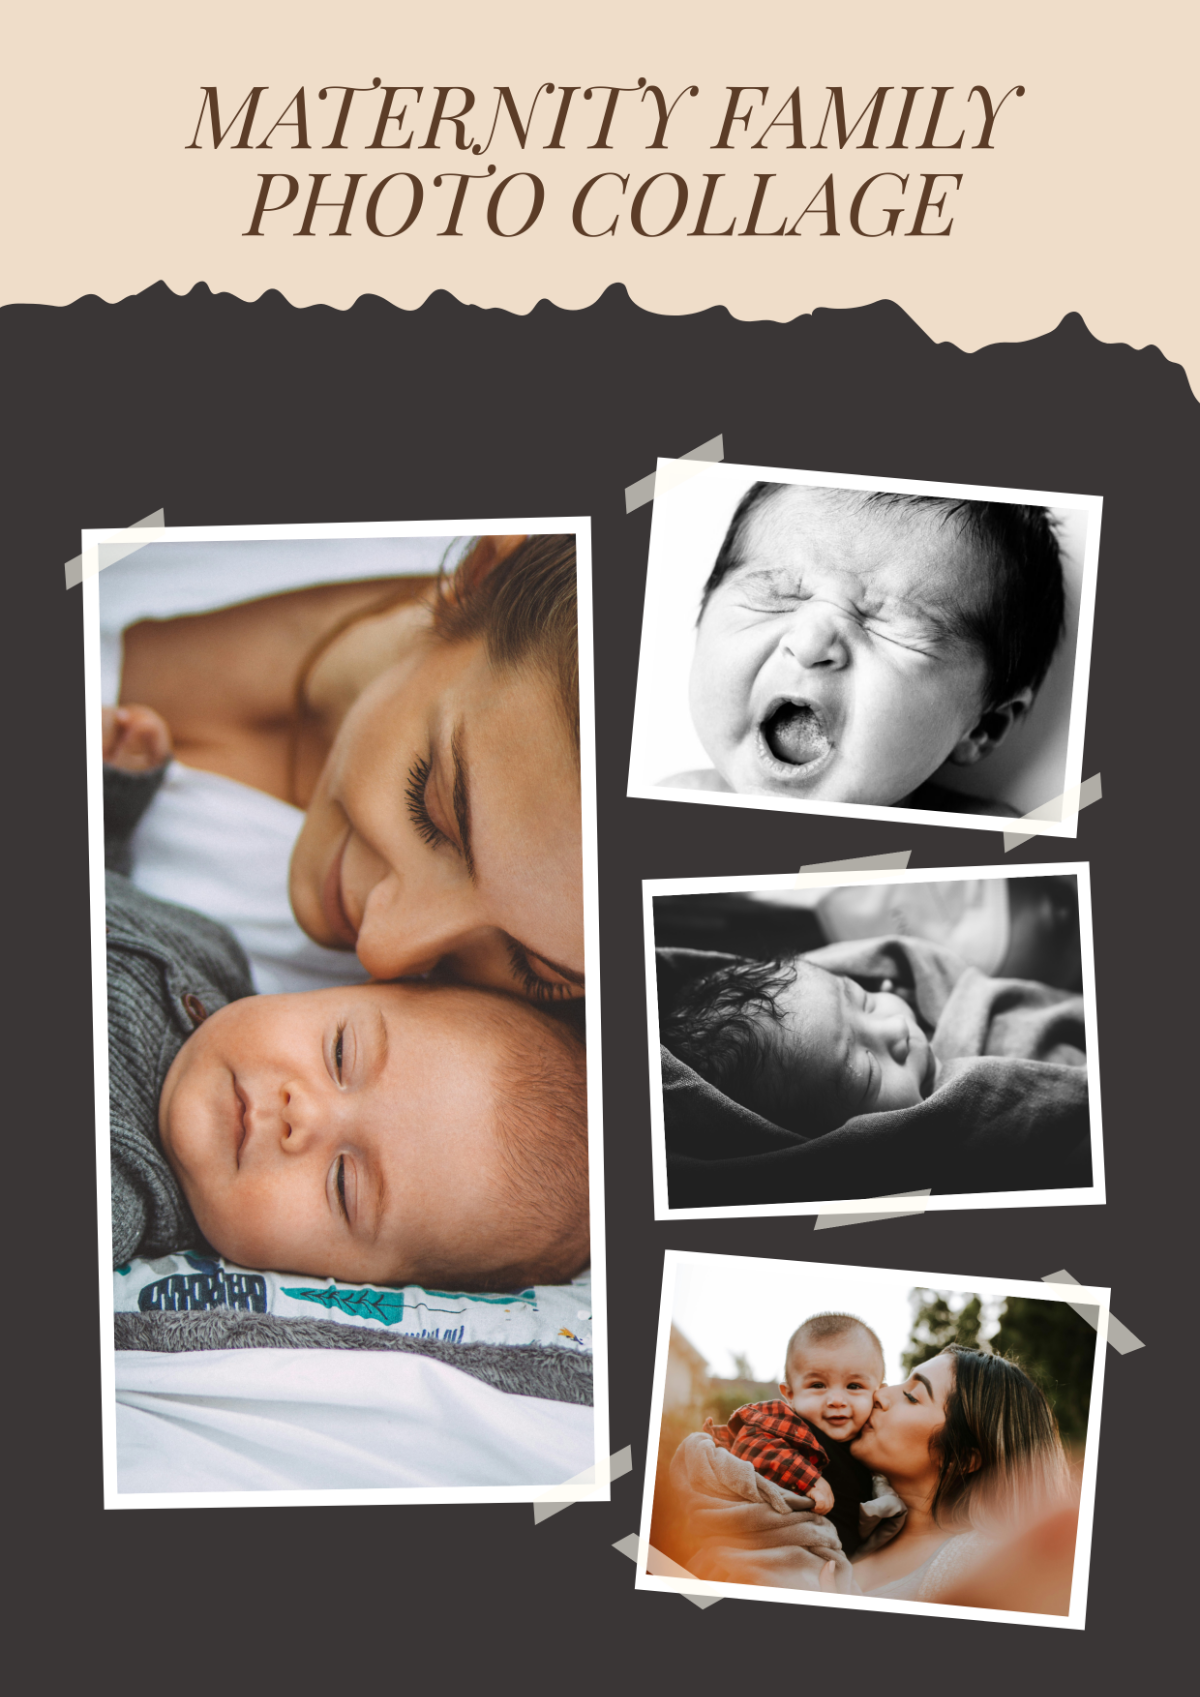 Maternity Family Photo Collage